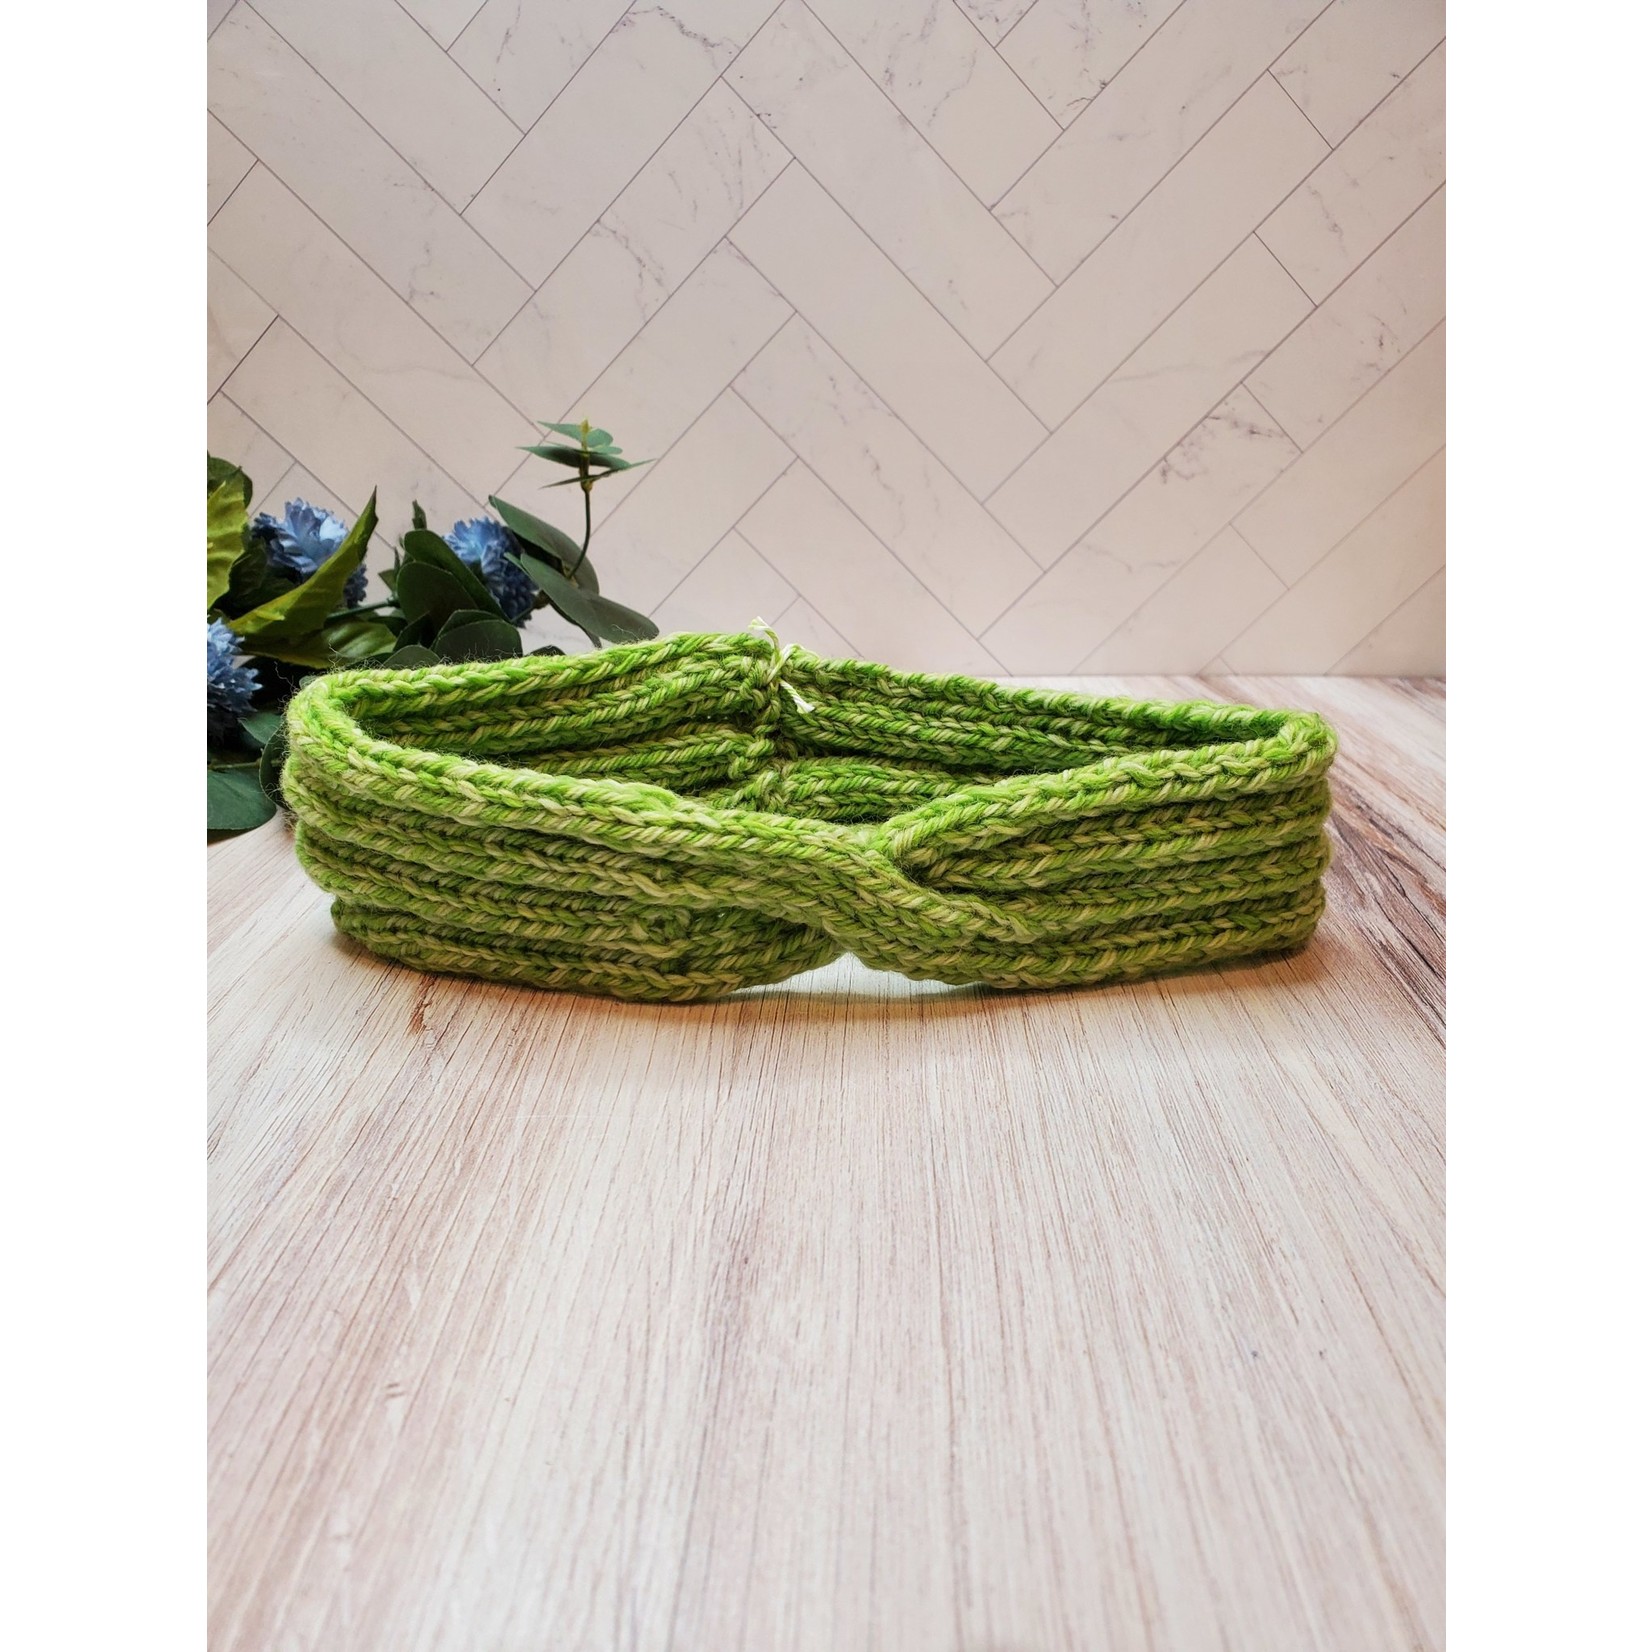 Roan's Repertoire Knitted Headband - Lime Green